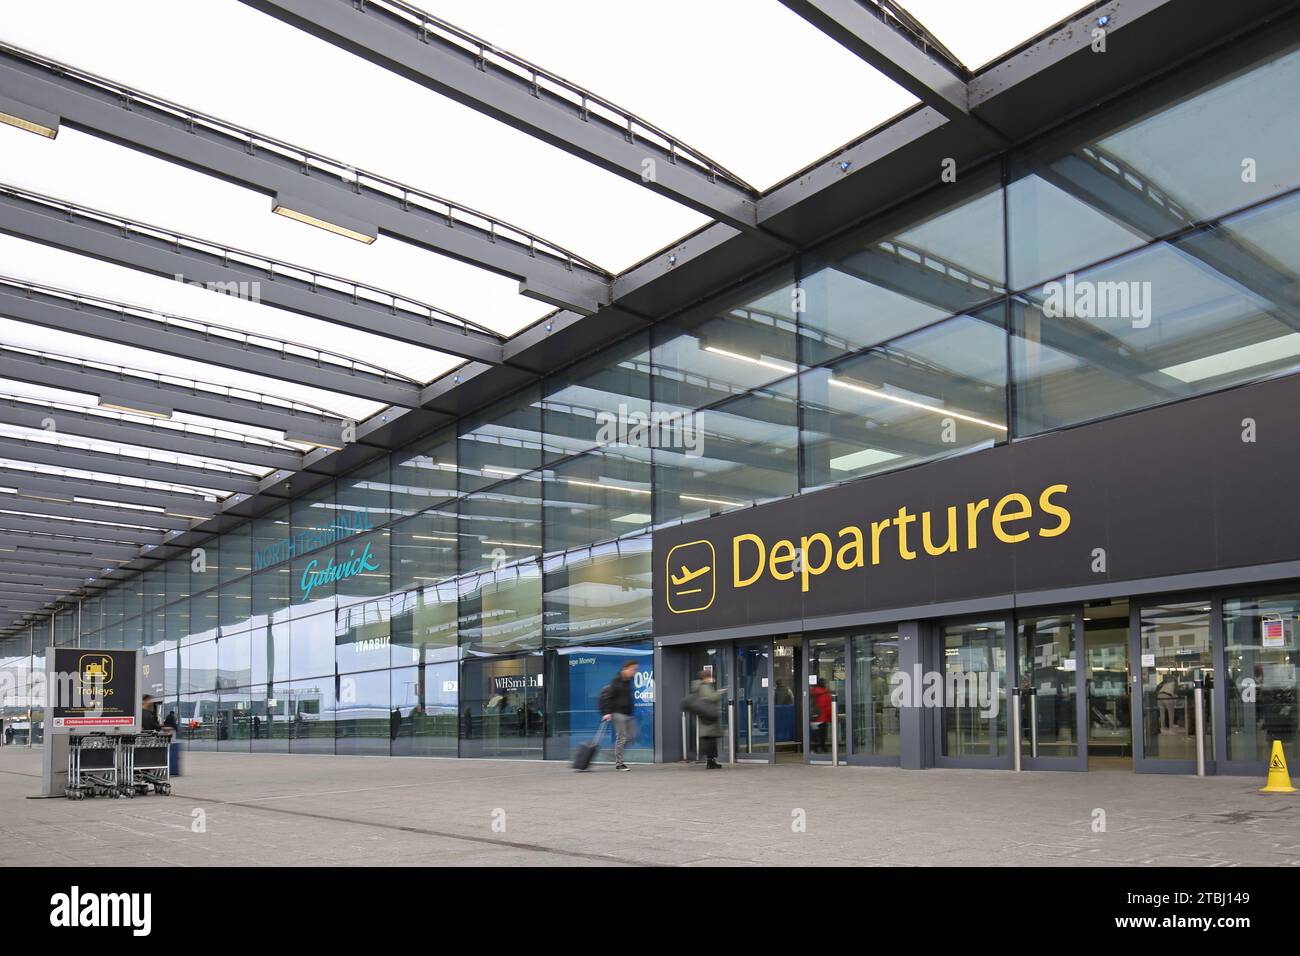 Gatwick Airport, UK, North Terminal, Departures entrance, exterior view. Passengers enter with luggage (blurred by motion). Stock Photo